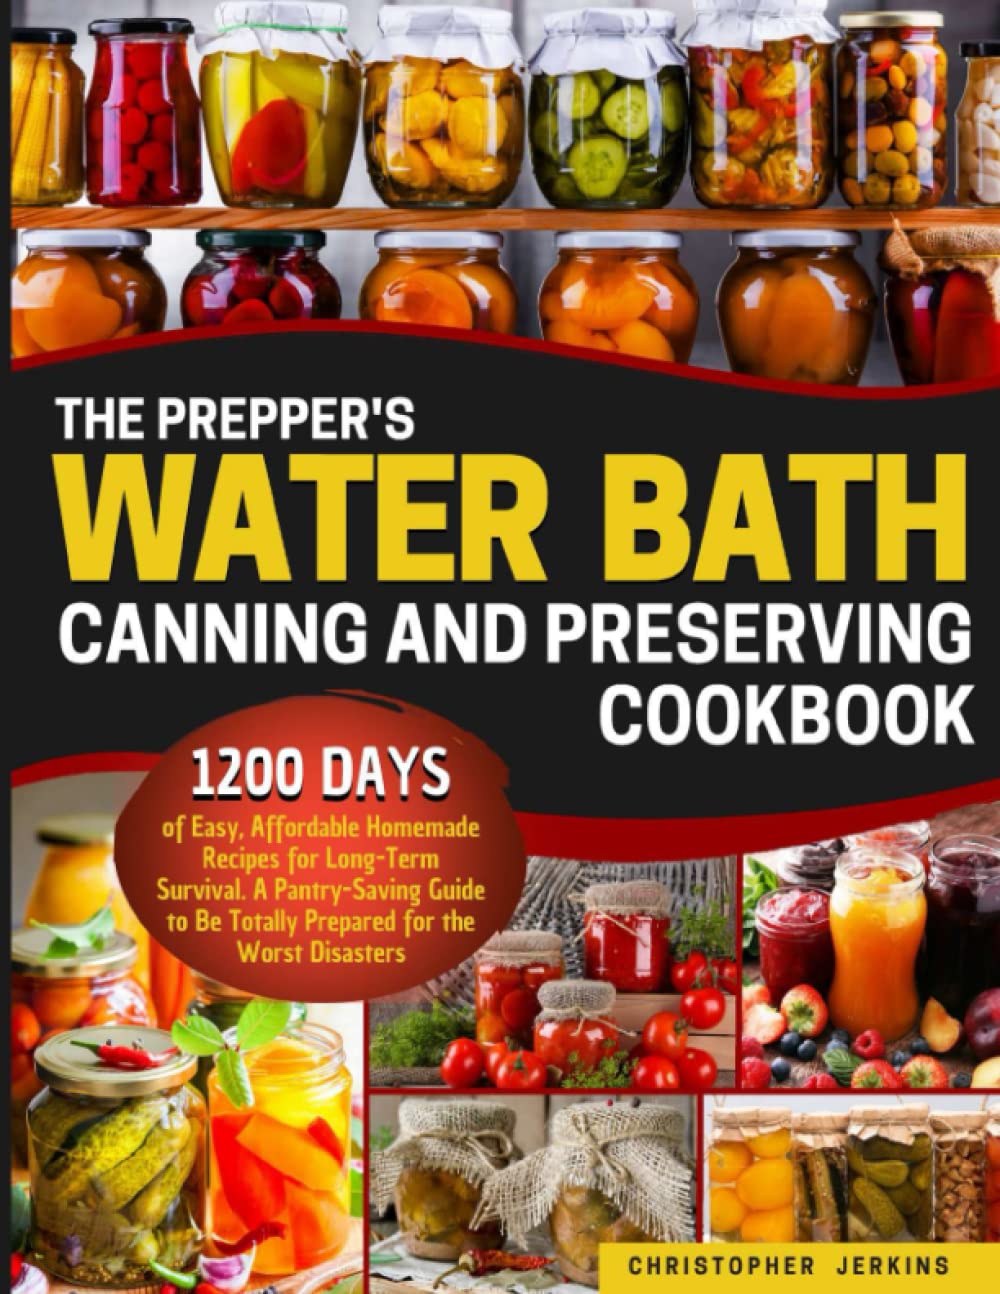 The Prepper’s Water Bath Canning and Preserving Cookbook: 1200-Days of Easy, Affordable Homemade Recipes for Long-Term Survival. A Pantry-Saving Guide to Be Totally Prepared for the Worst Disasters